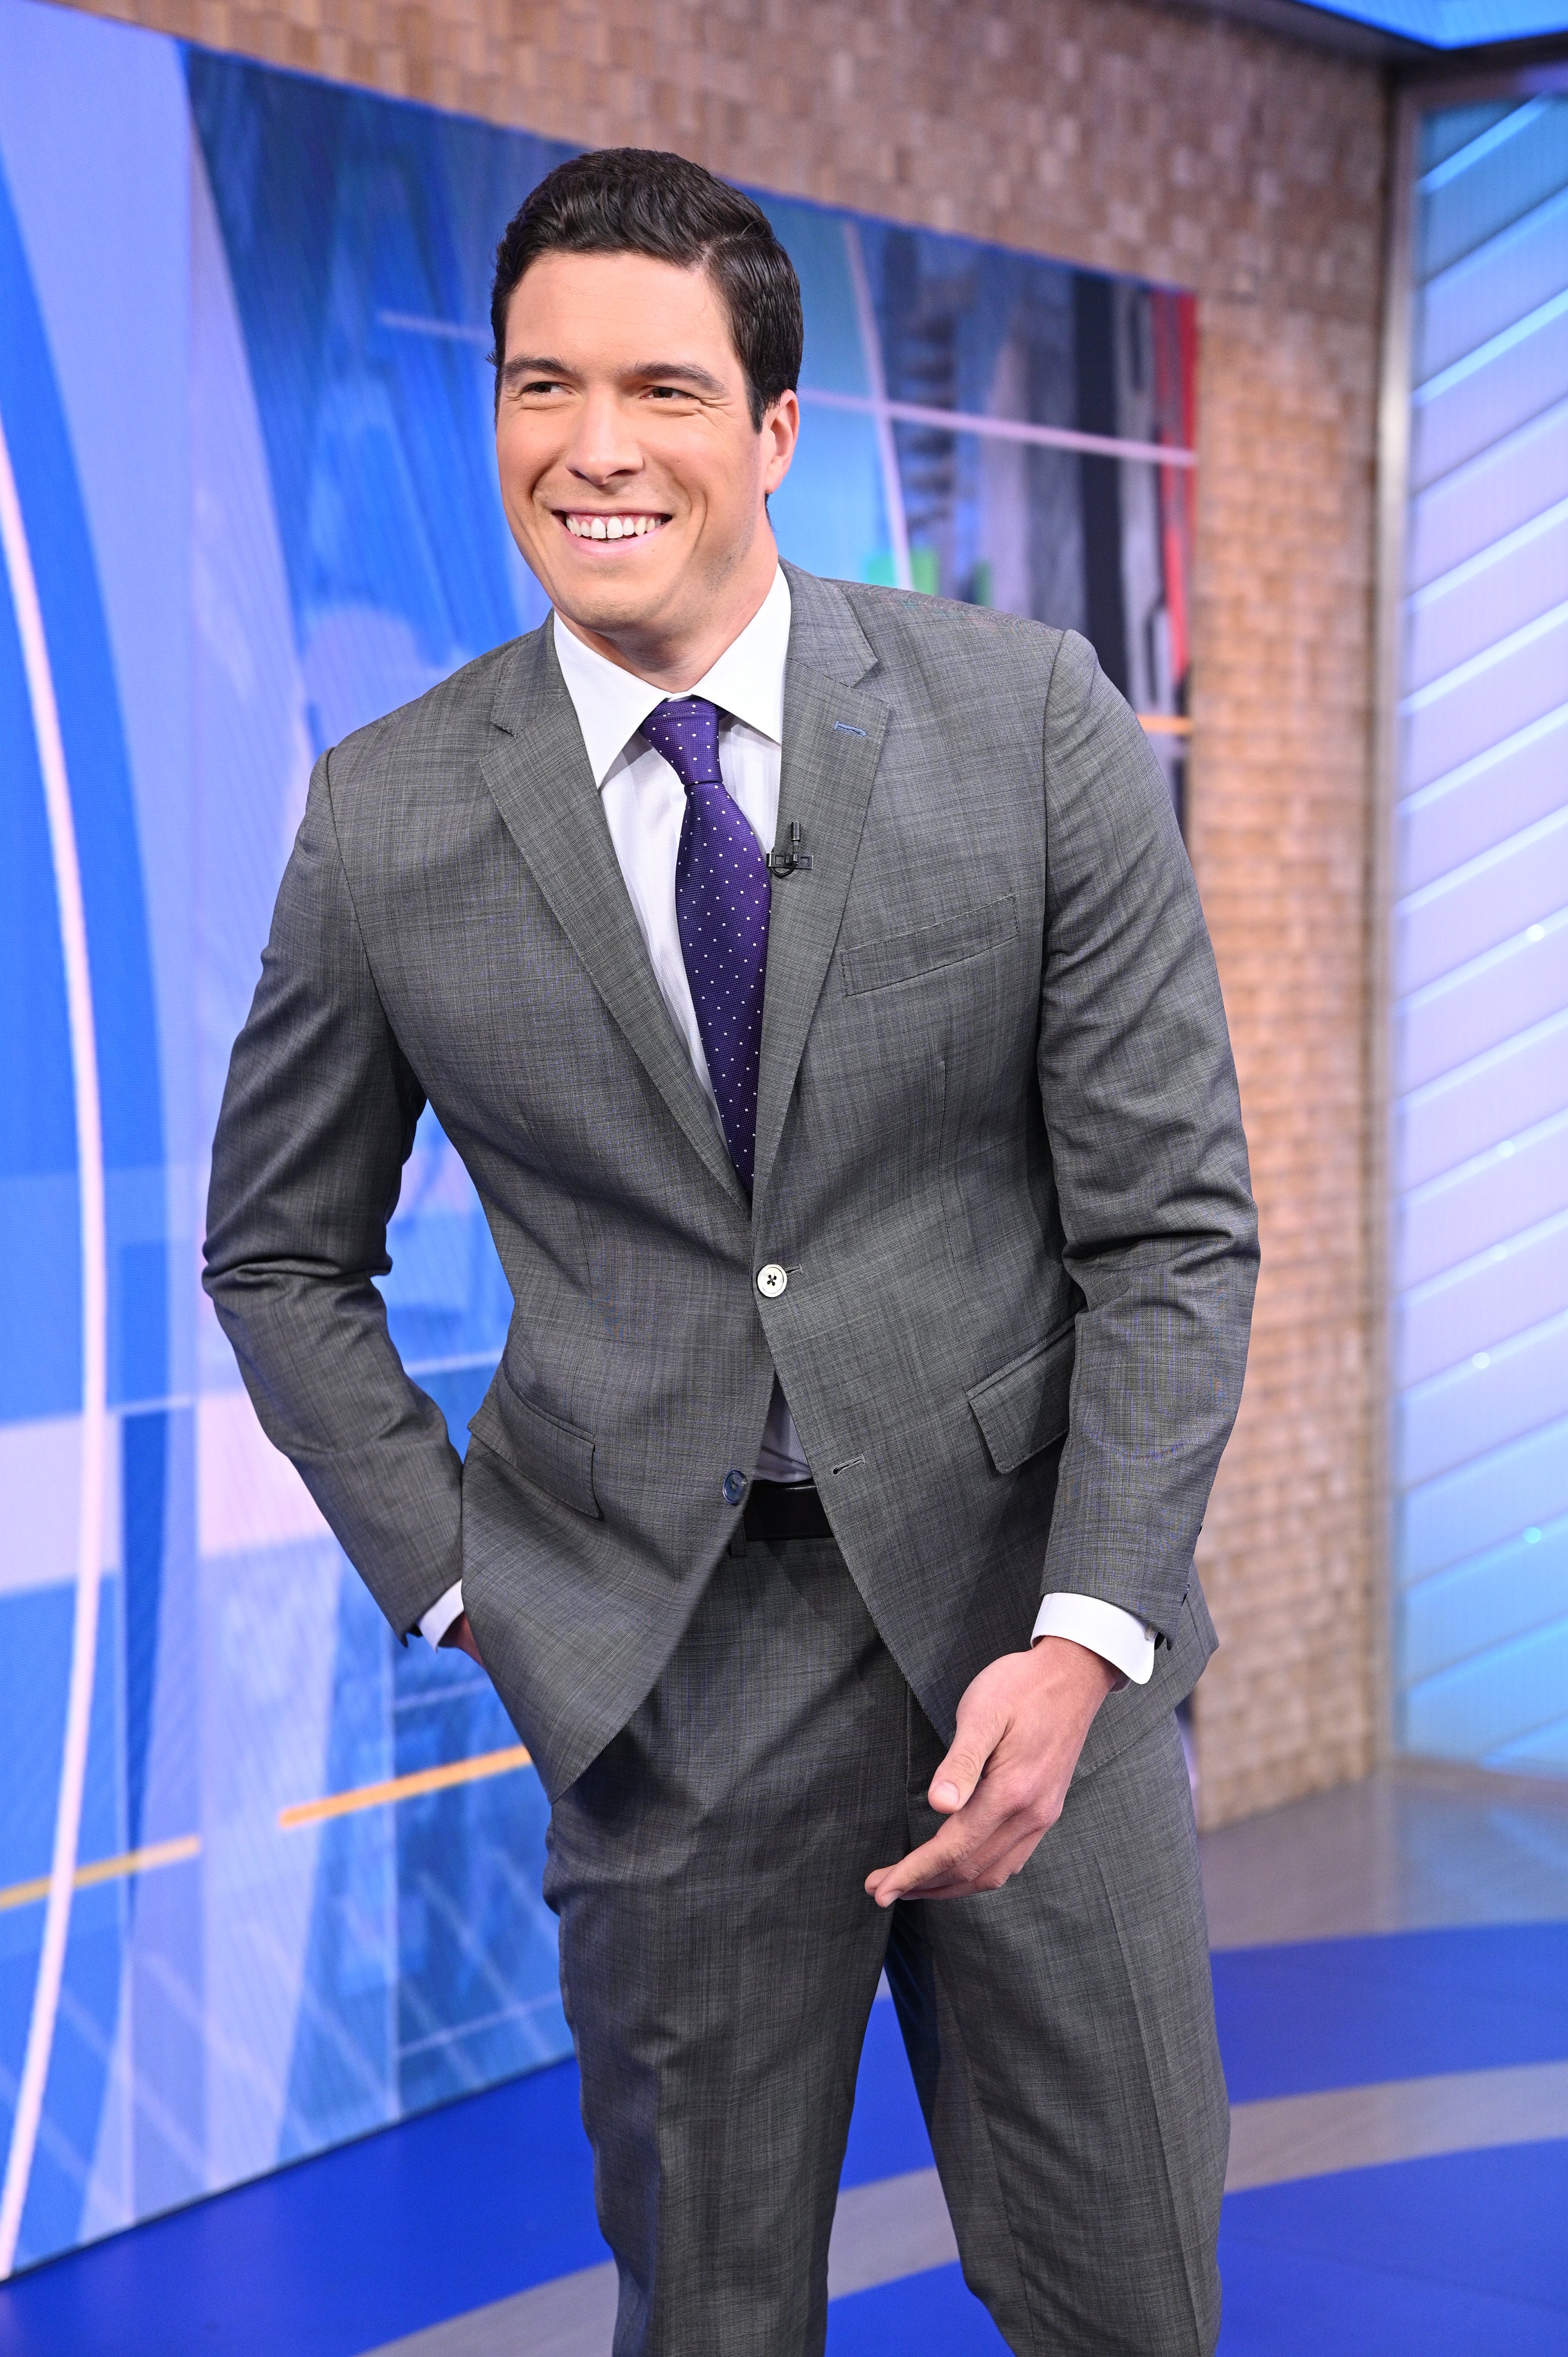 Will Reeve on "Good Morning America" on ABC on January 17, 2020 | Photo: Lorenzo Bevilaqua/Getty Images